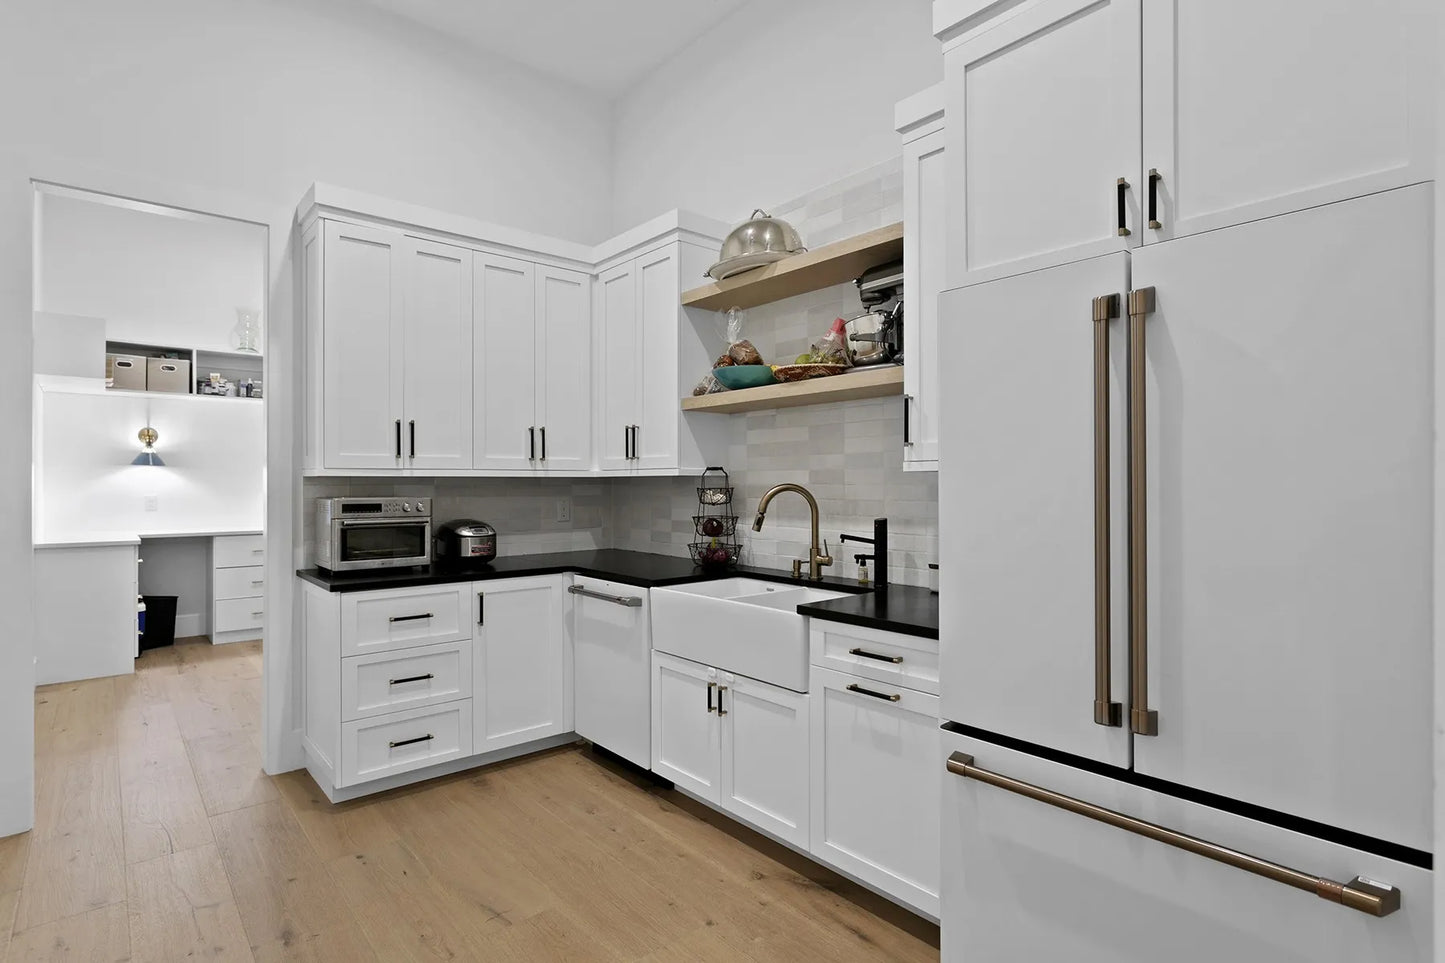 6 Kitchen Cabinet Trends You'll See in 2024, According to Top